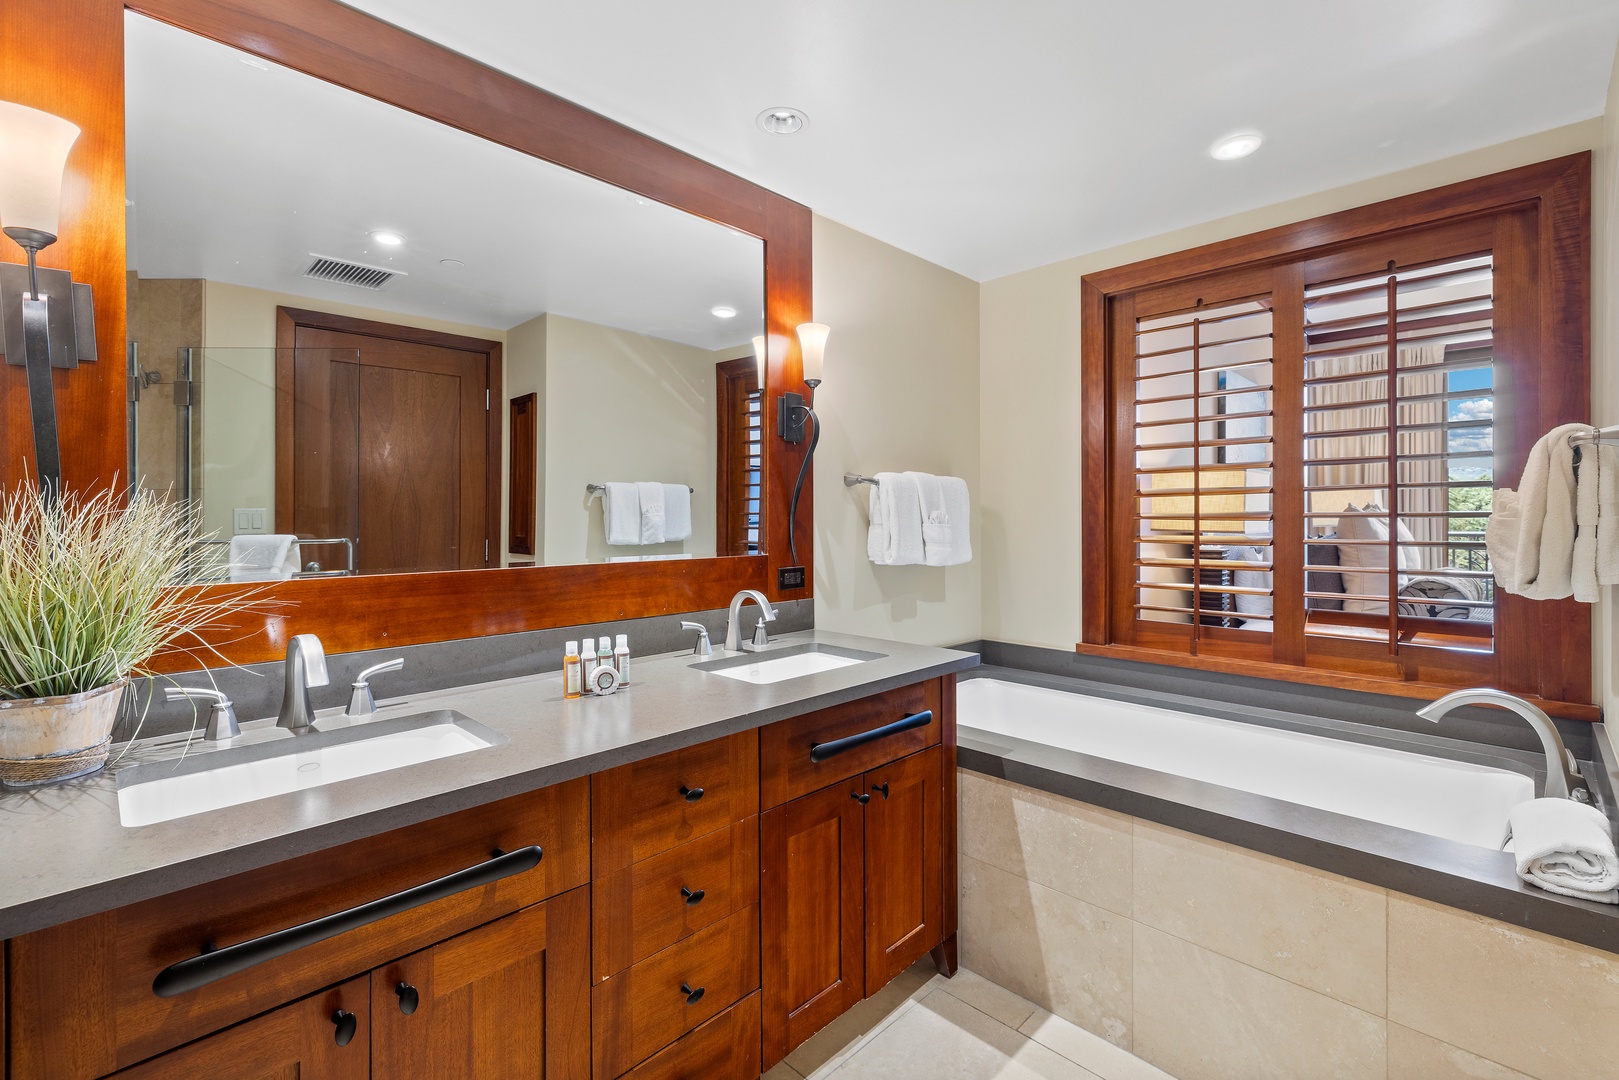 Kapolei Vacation Rentals, Ko Olina Beach Villas O402 - The primary guest bath is a full bathroom with a double vanity.